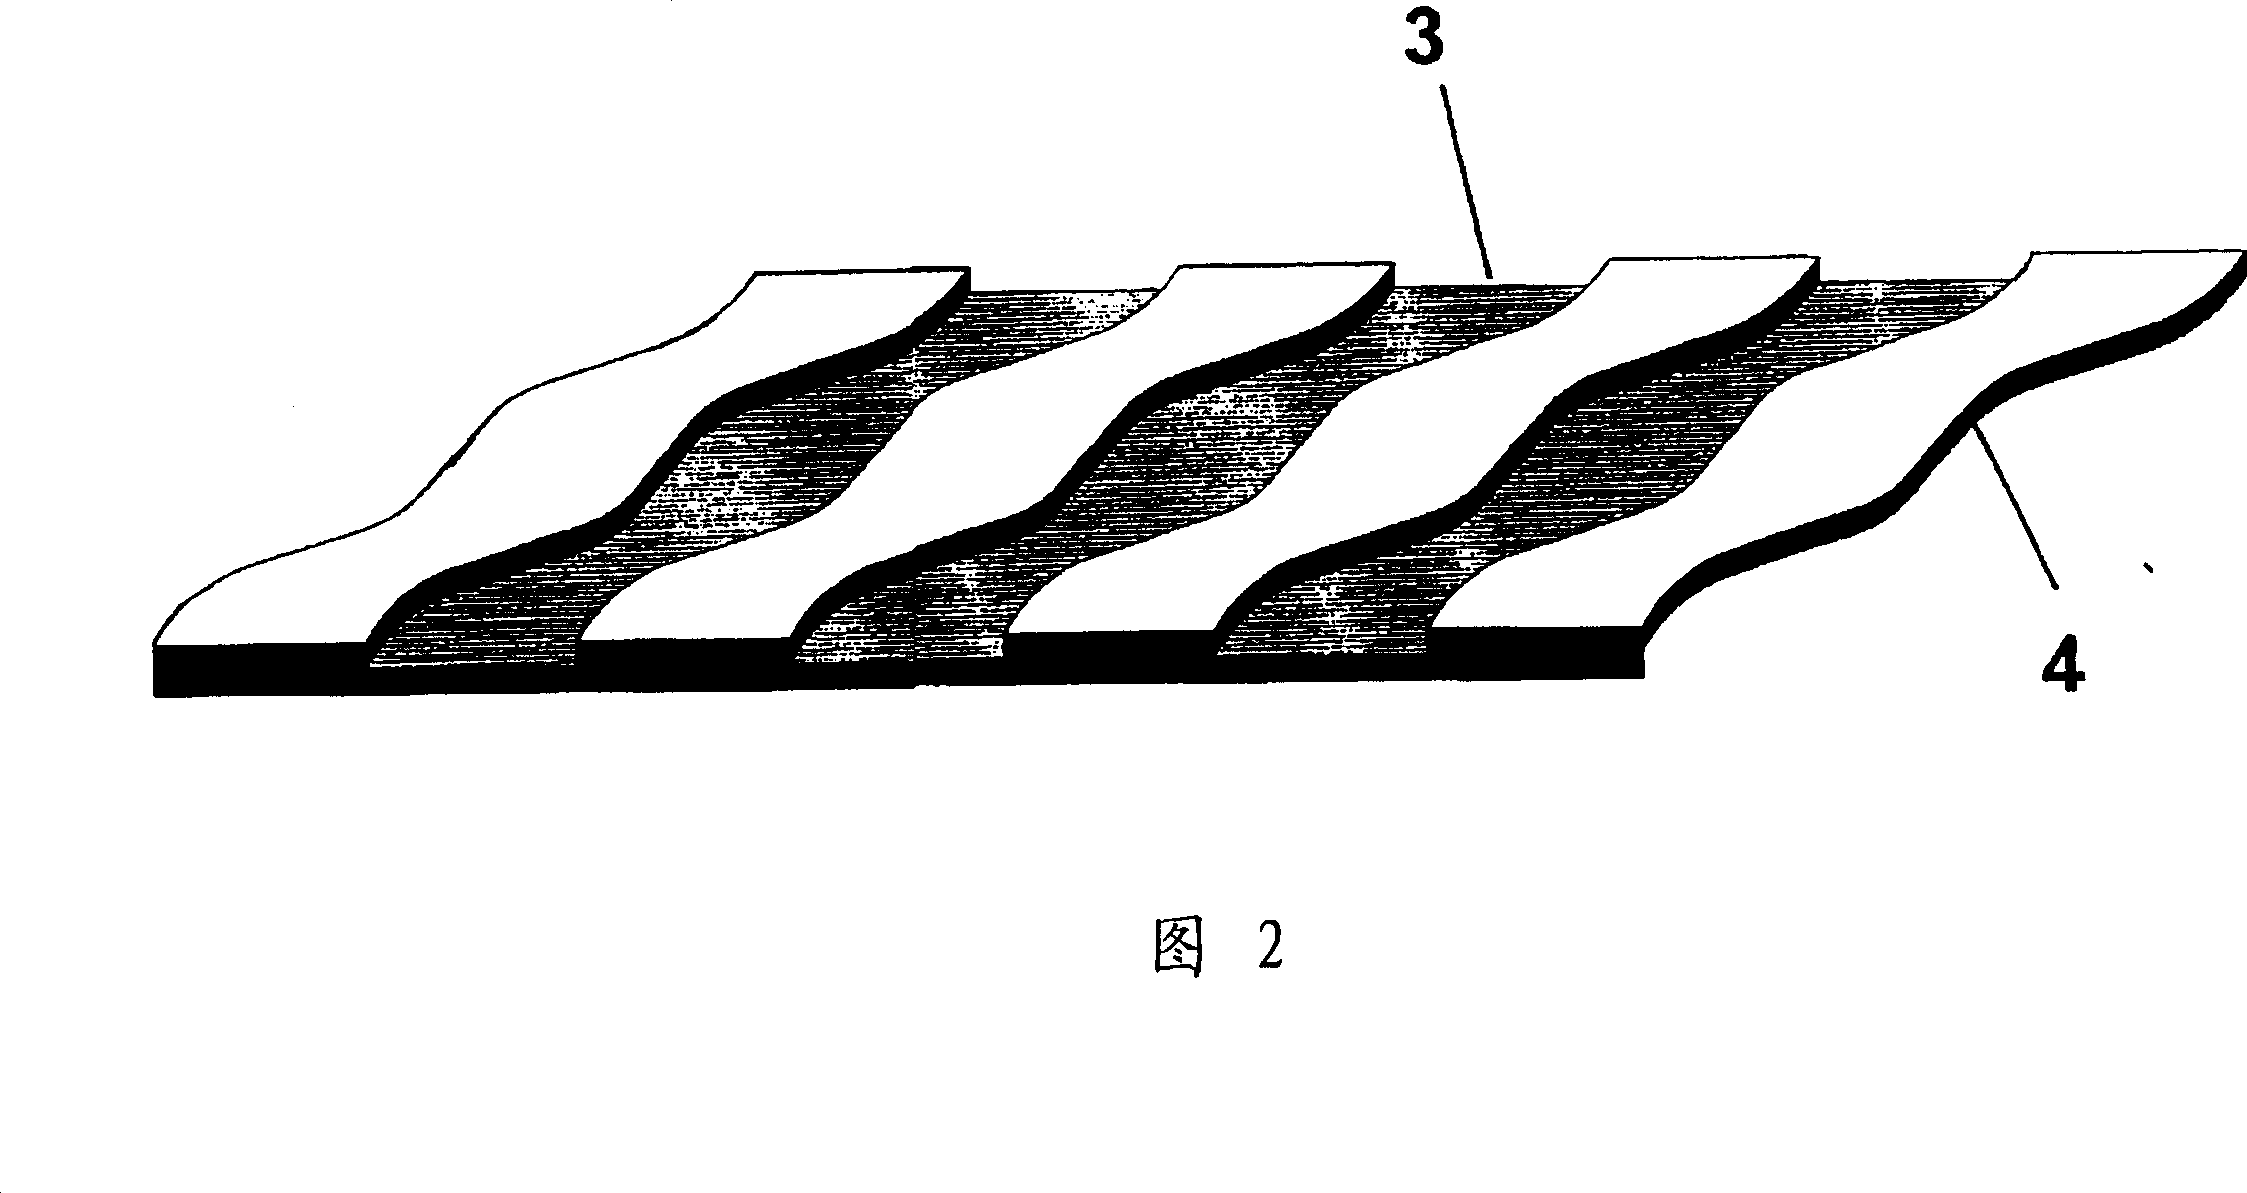 Appliance for recording or playing back information having means for detecting or moving the scanning location